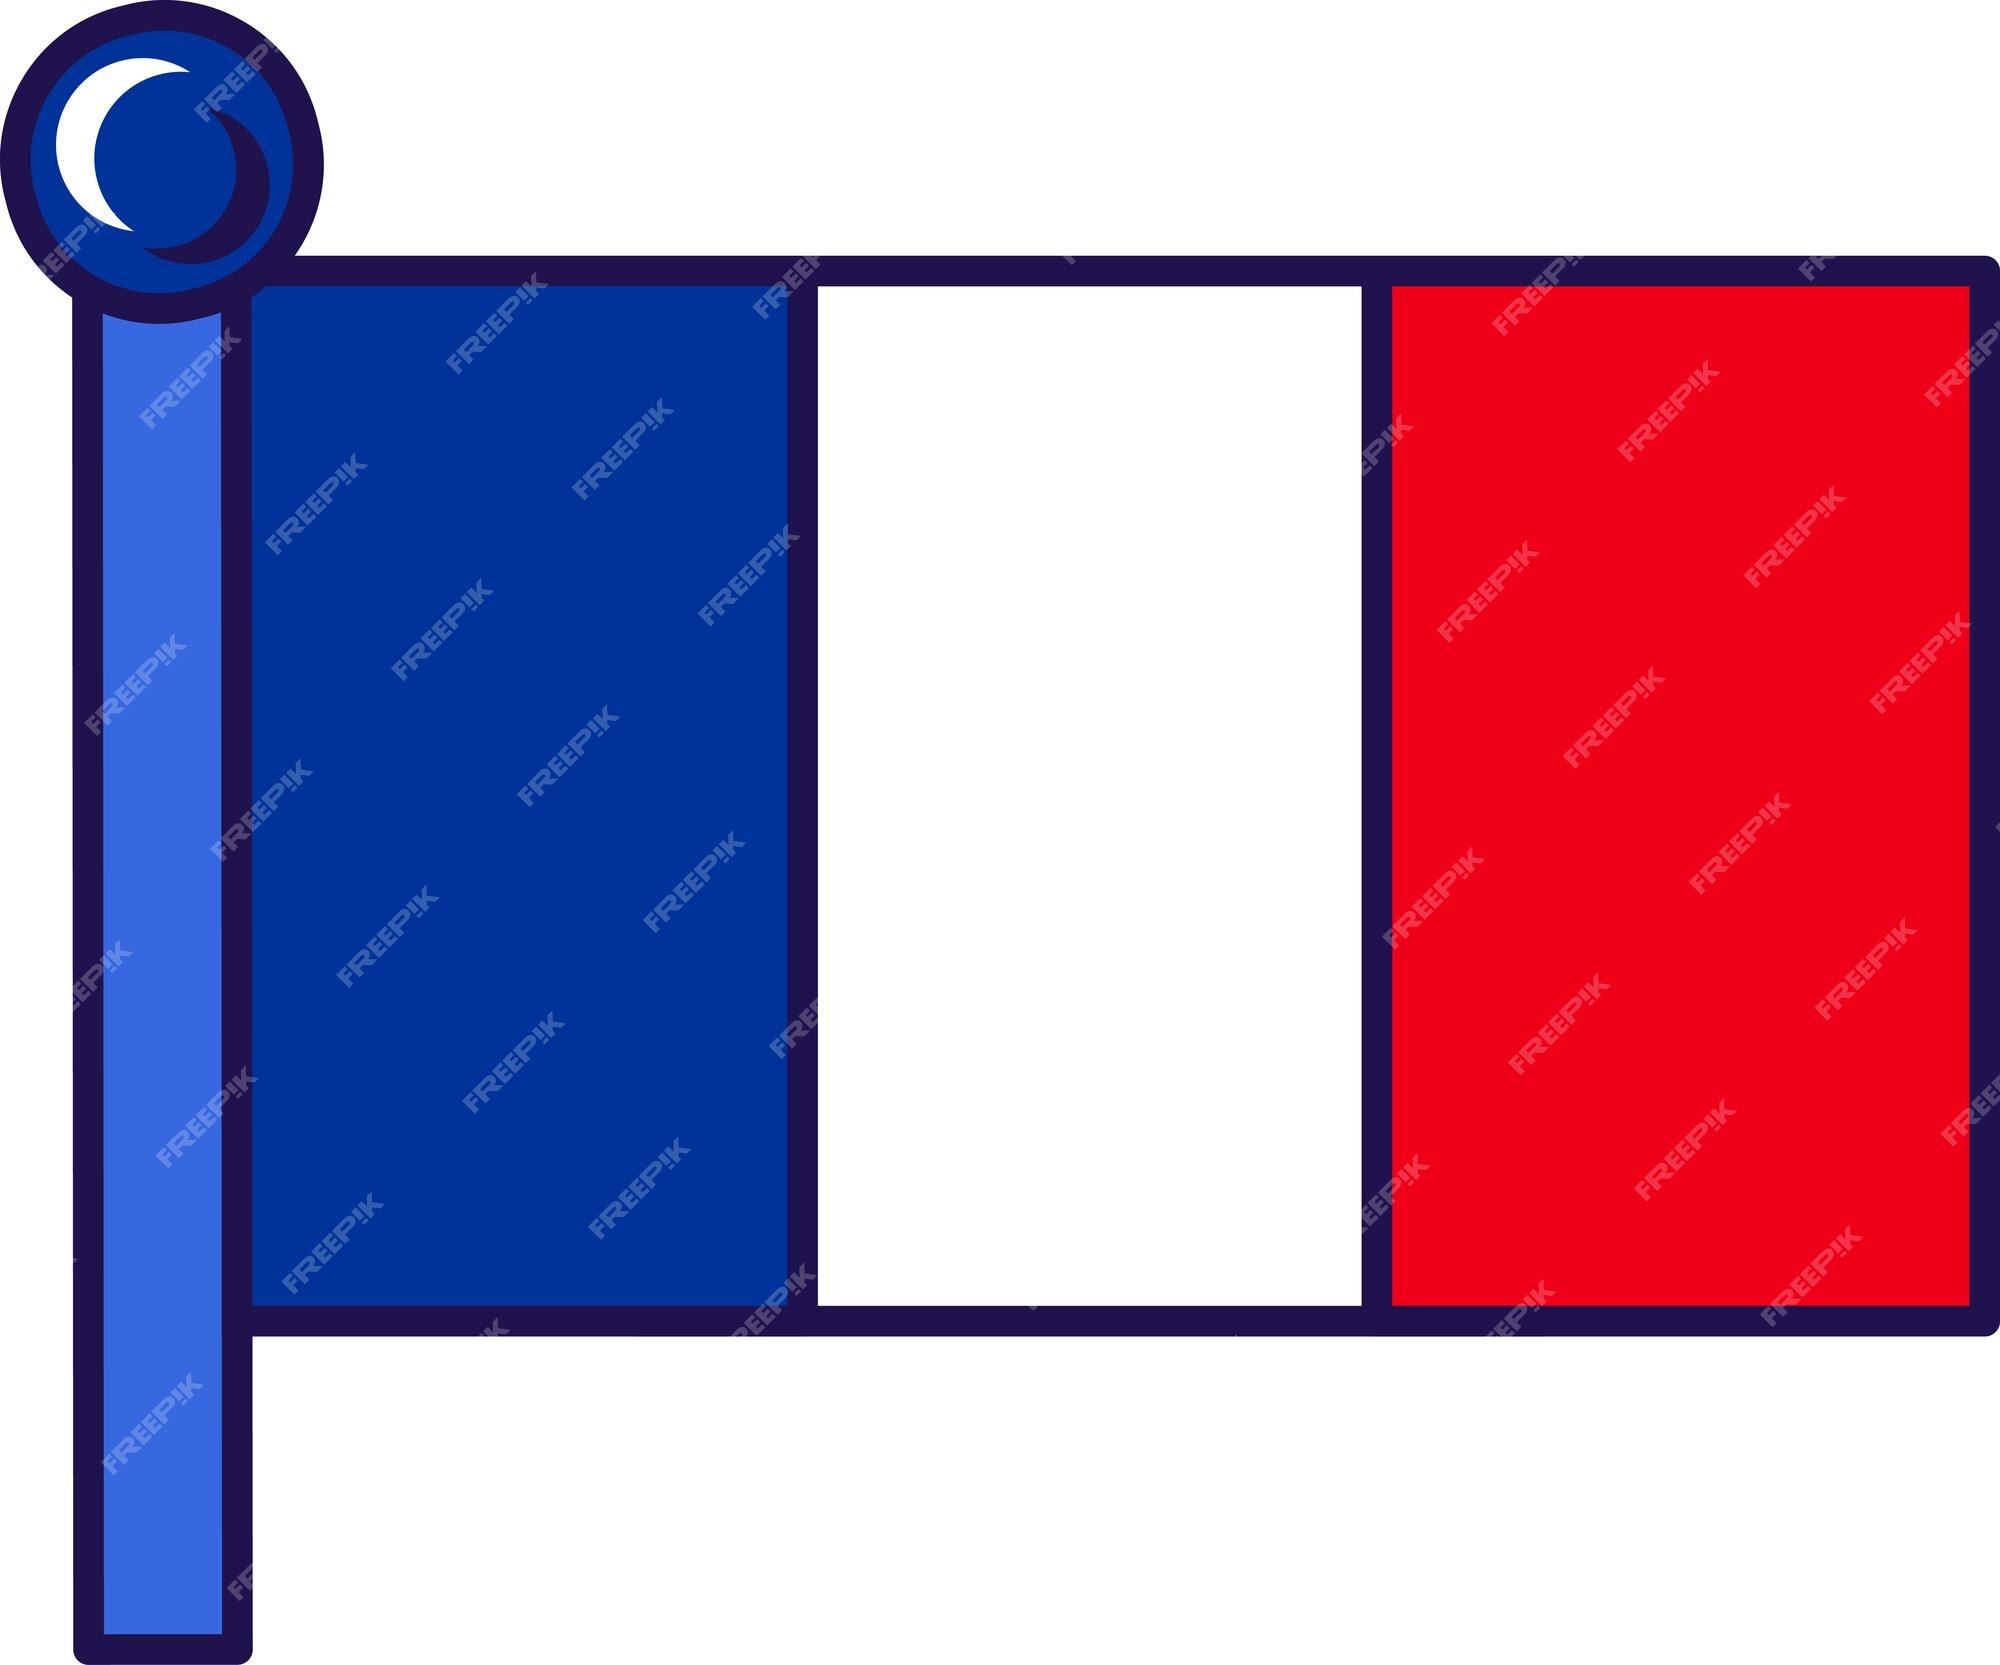 France french flag banner tricolore' Sticker | Spreadshirt